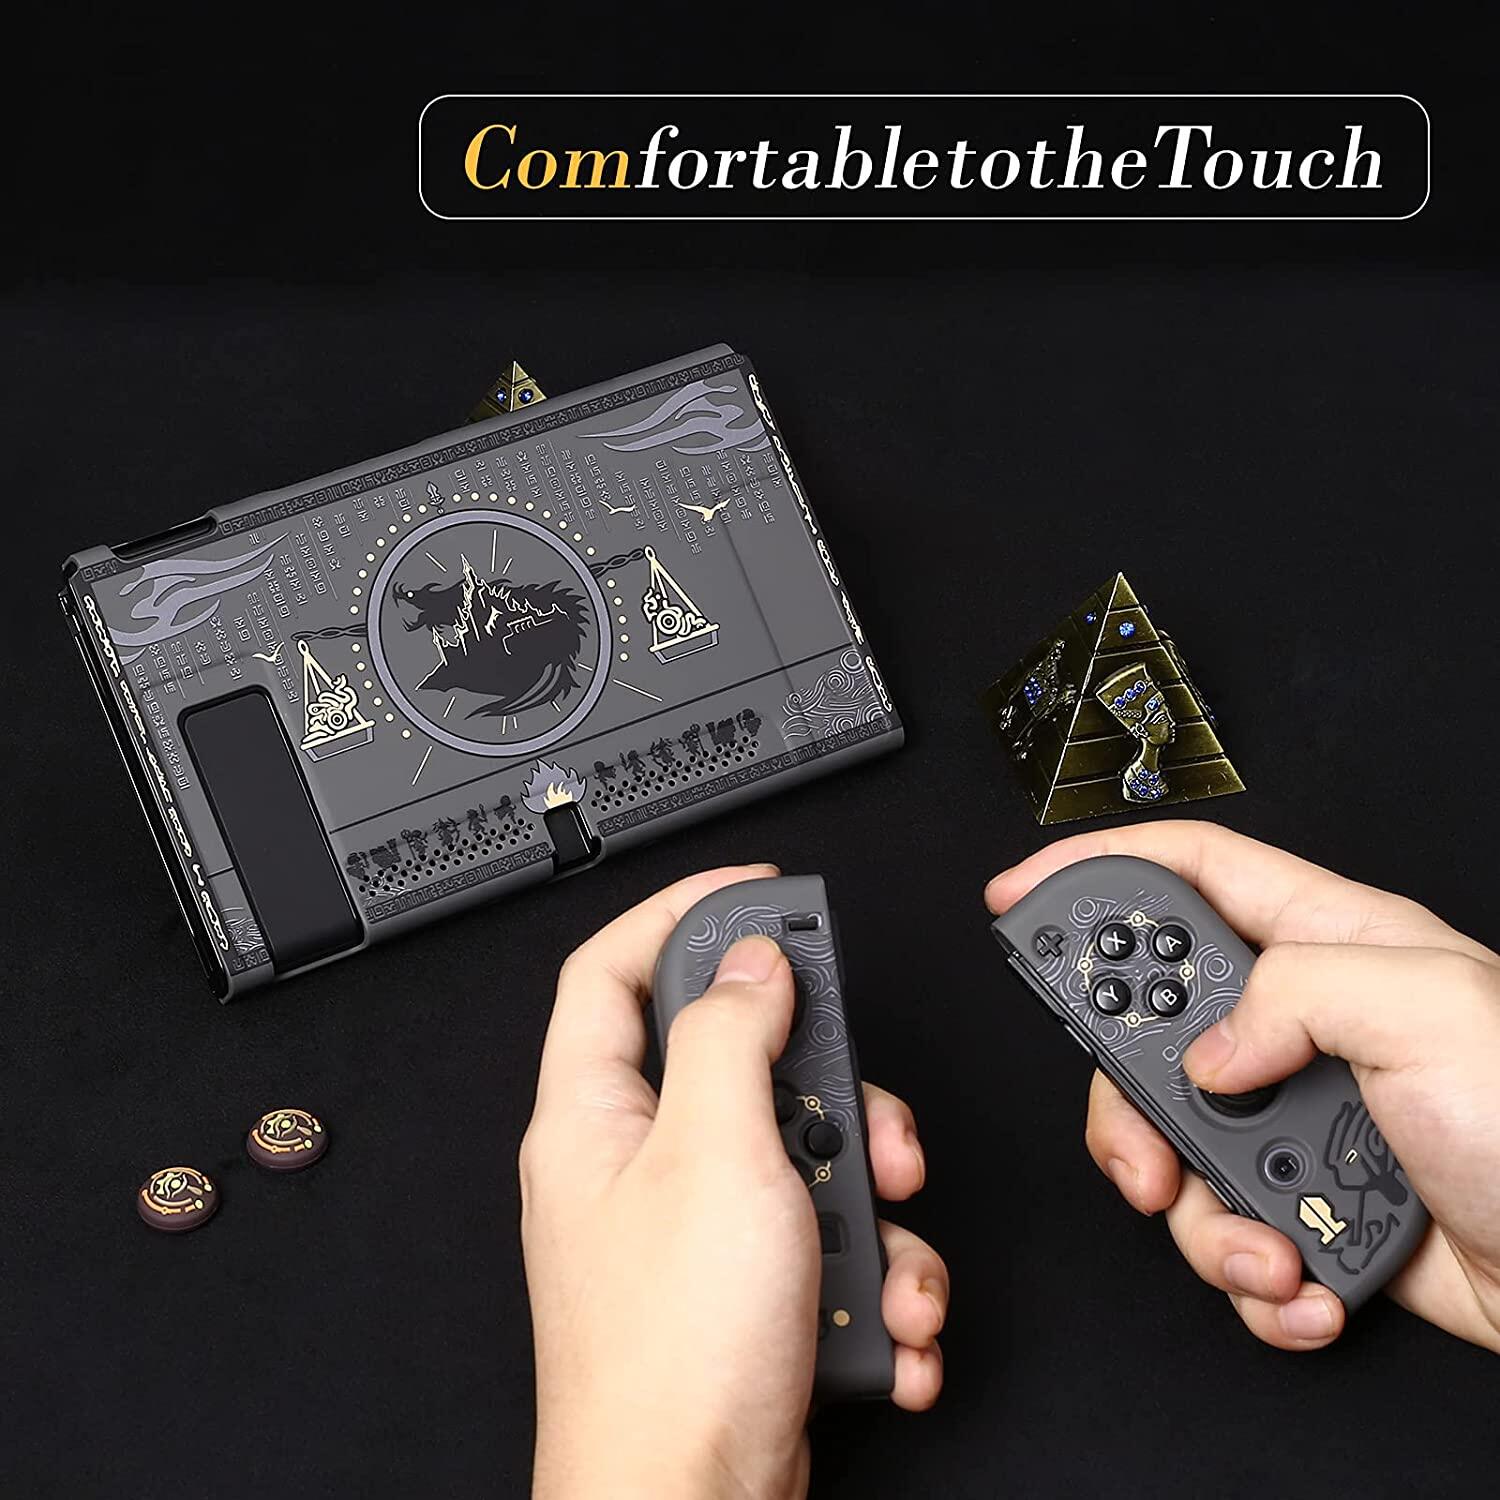 Zelda Design Hard Shell Case Handheld Grip for Nintendo Switch OLED / Switch V2 Console and Joy-Con Controllers